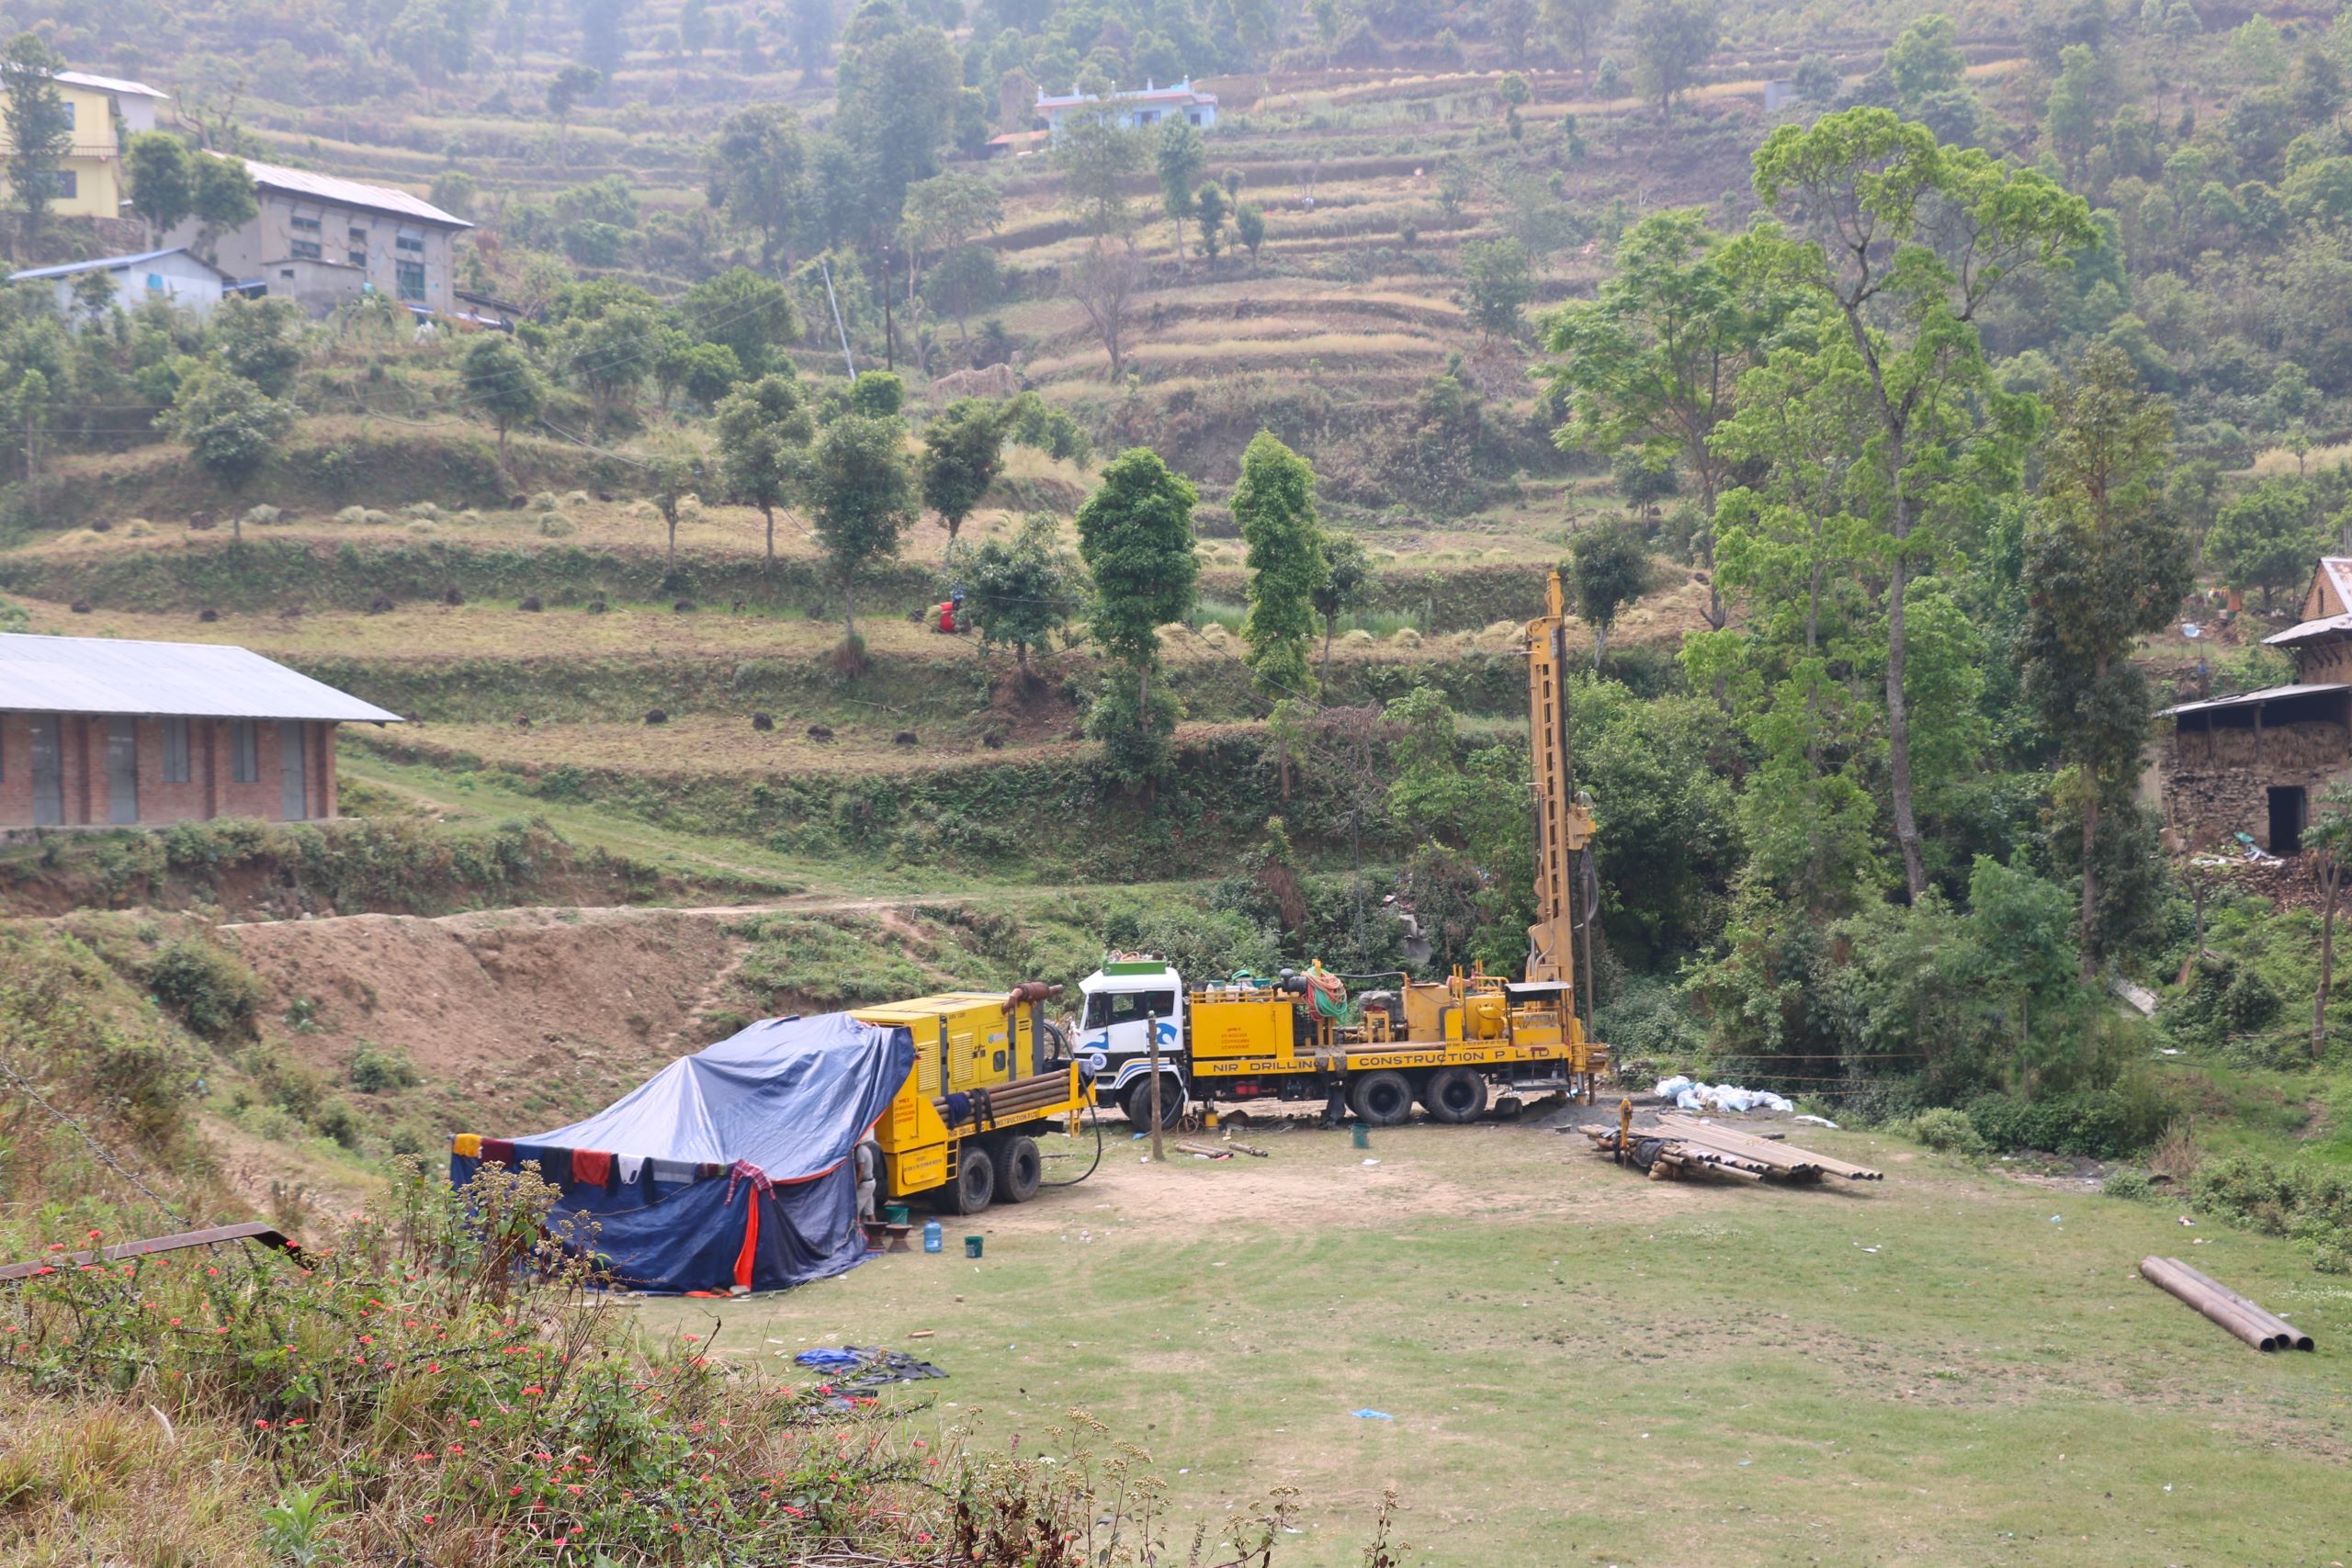 <p>A new deep bore well is constructed to provide water in a hilly municipality in Nepal (Image: Southasia Institute of Advanced Studies)</p>